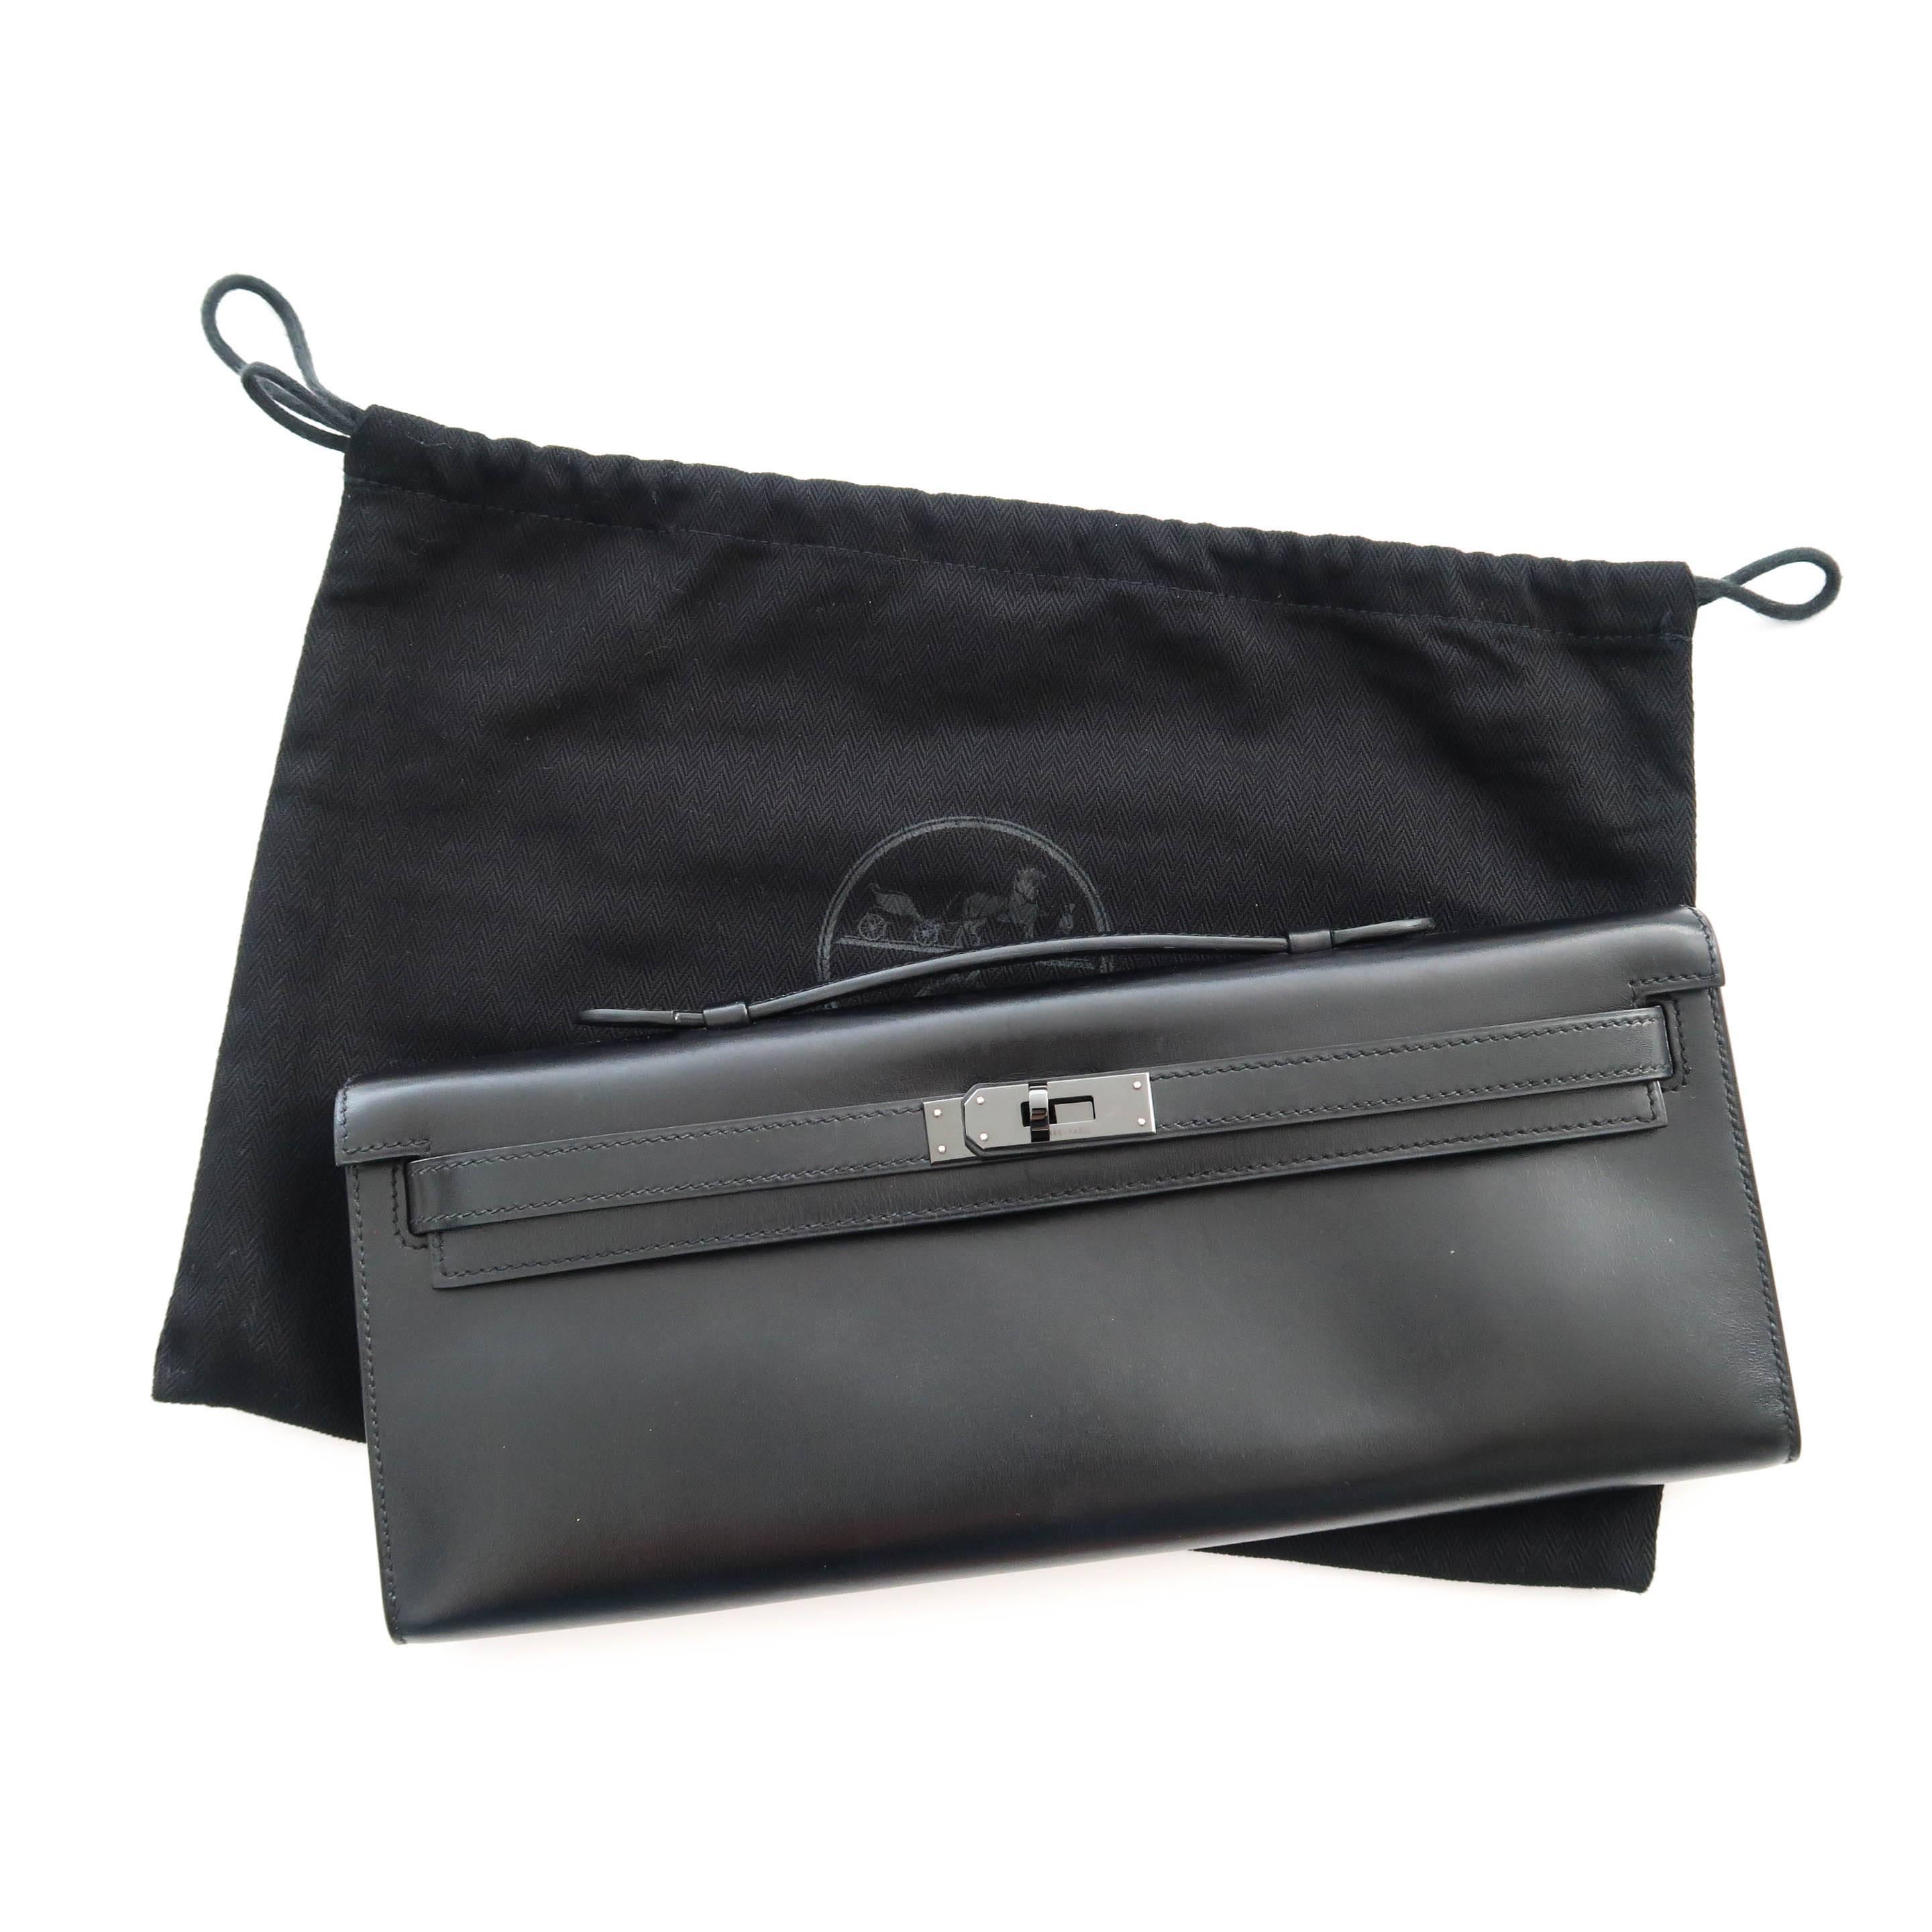 This piece is highly sought after and oh so hard to find. Treat yourself to an exclusive piece with classic elegance. The interior flat pocket and exterior turn lock enclosure allows you to tuck important items away safely. This clutch is a must